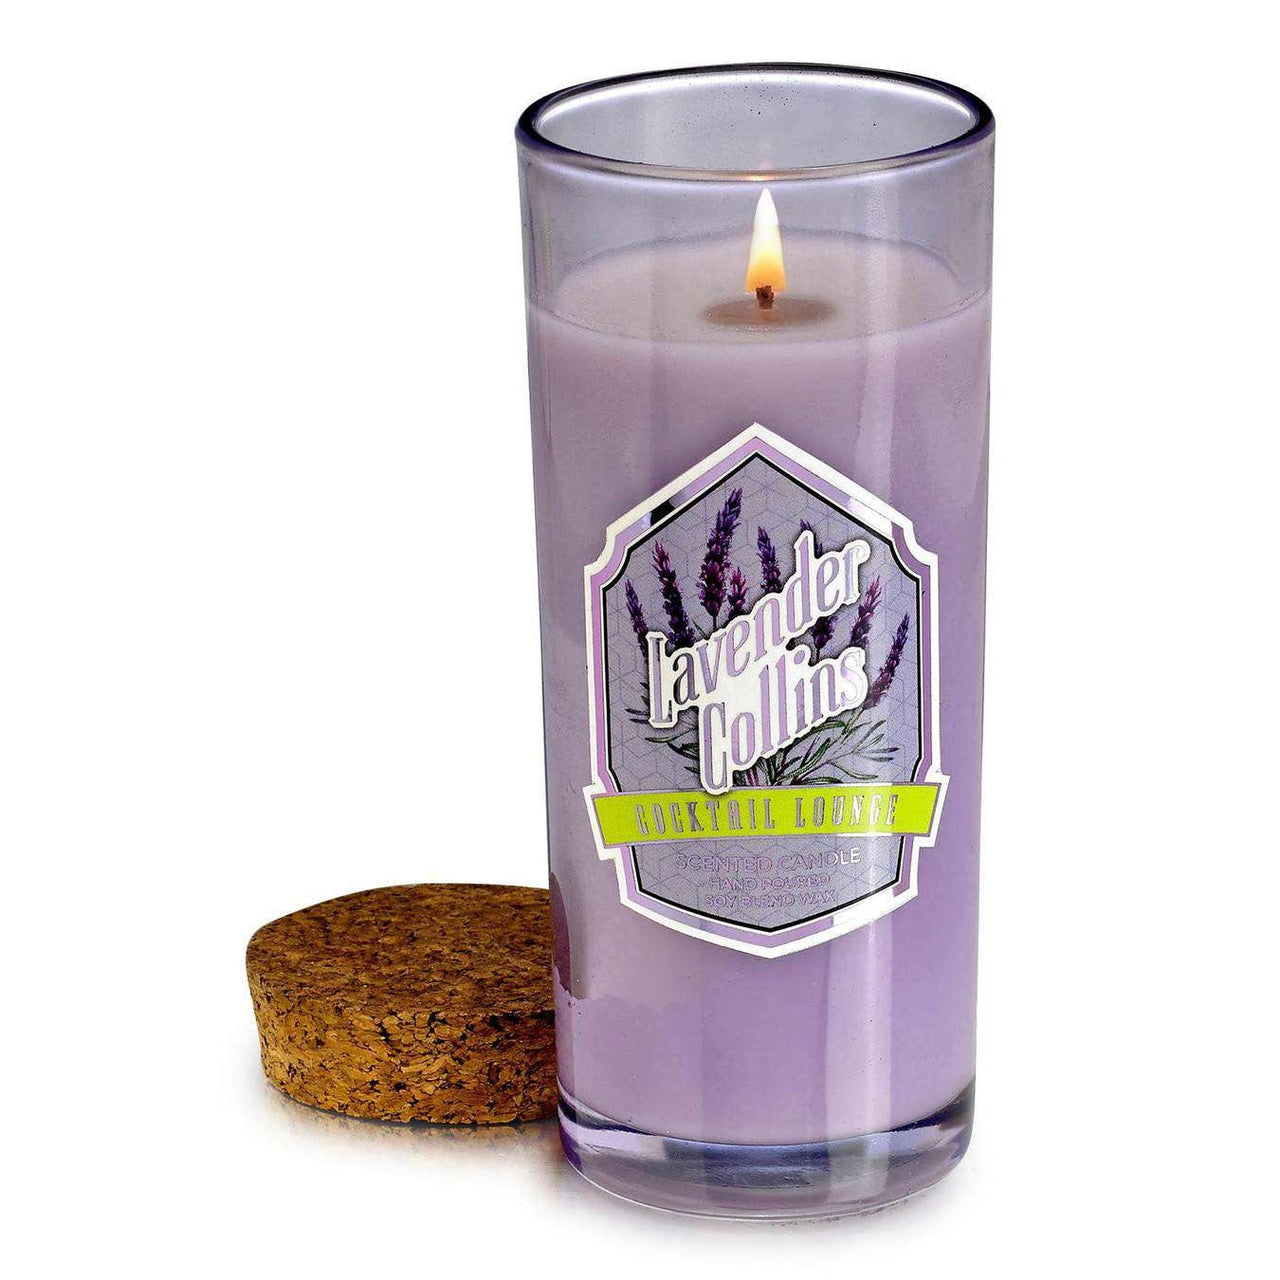 Lavender Collins Highball Scented Candle